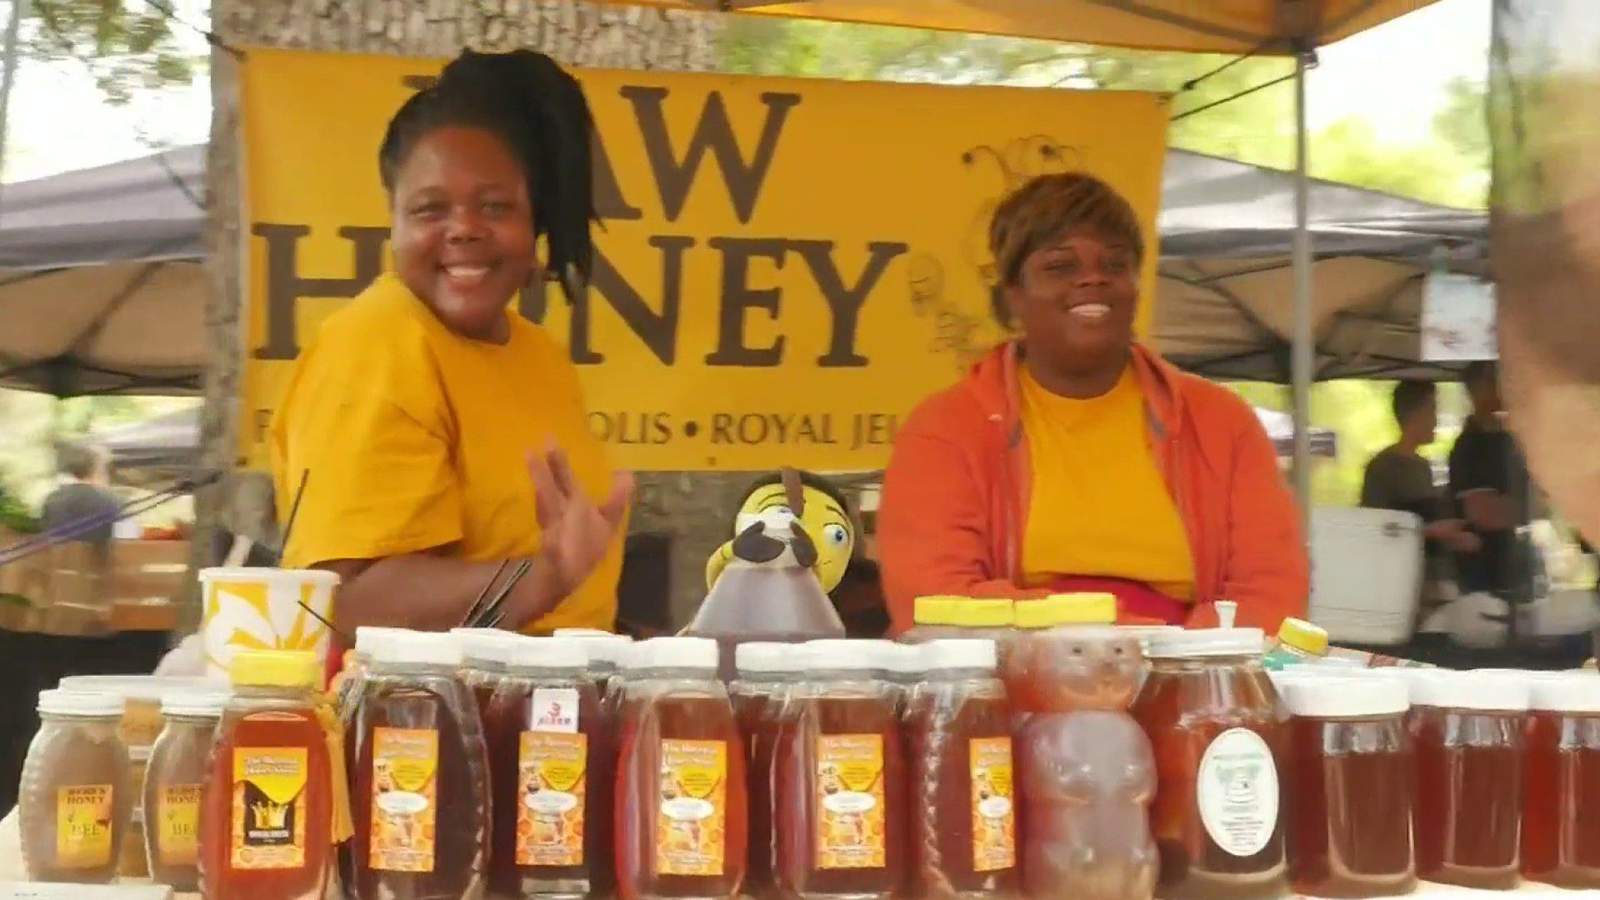 Popular farmers market returning to Lake Eola with new COVID-19 safety precautions